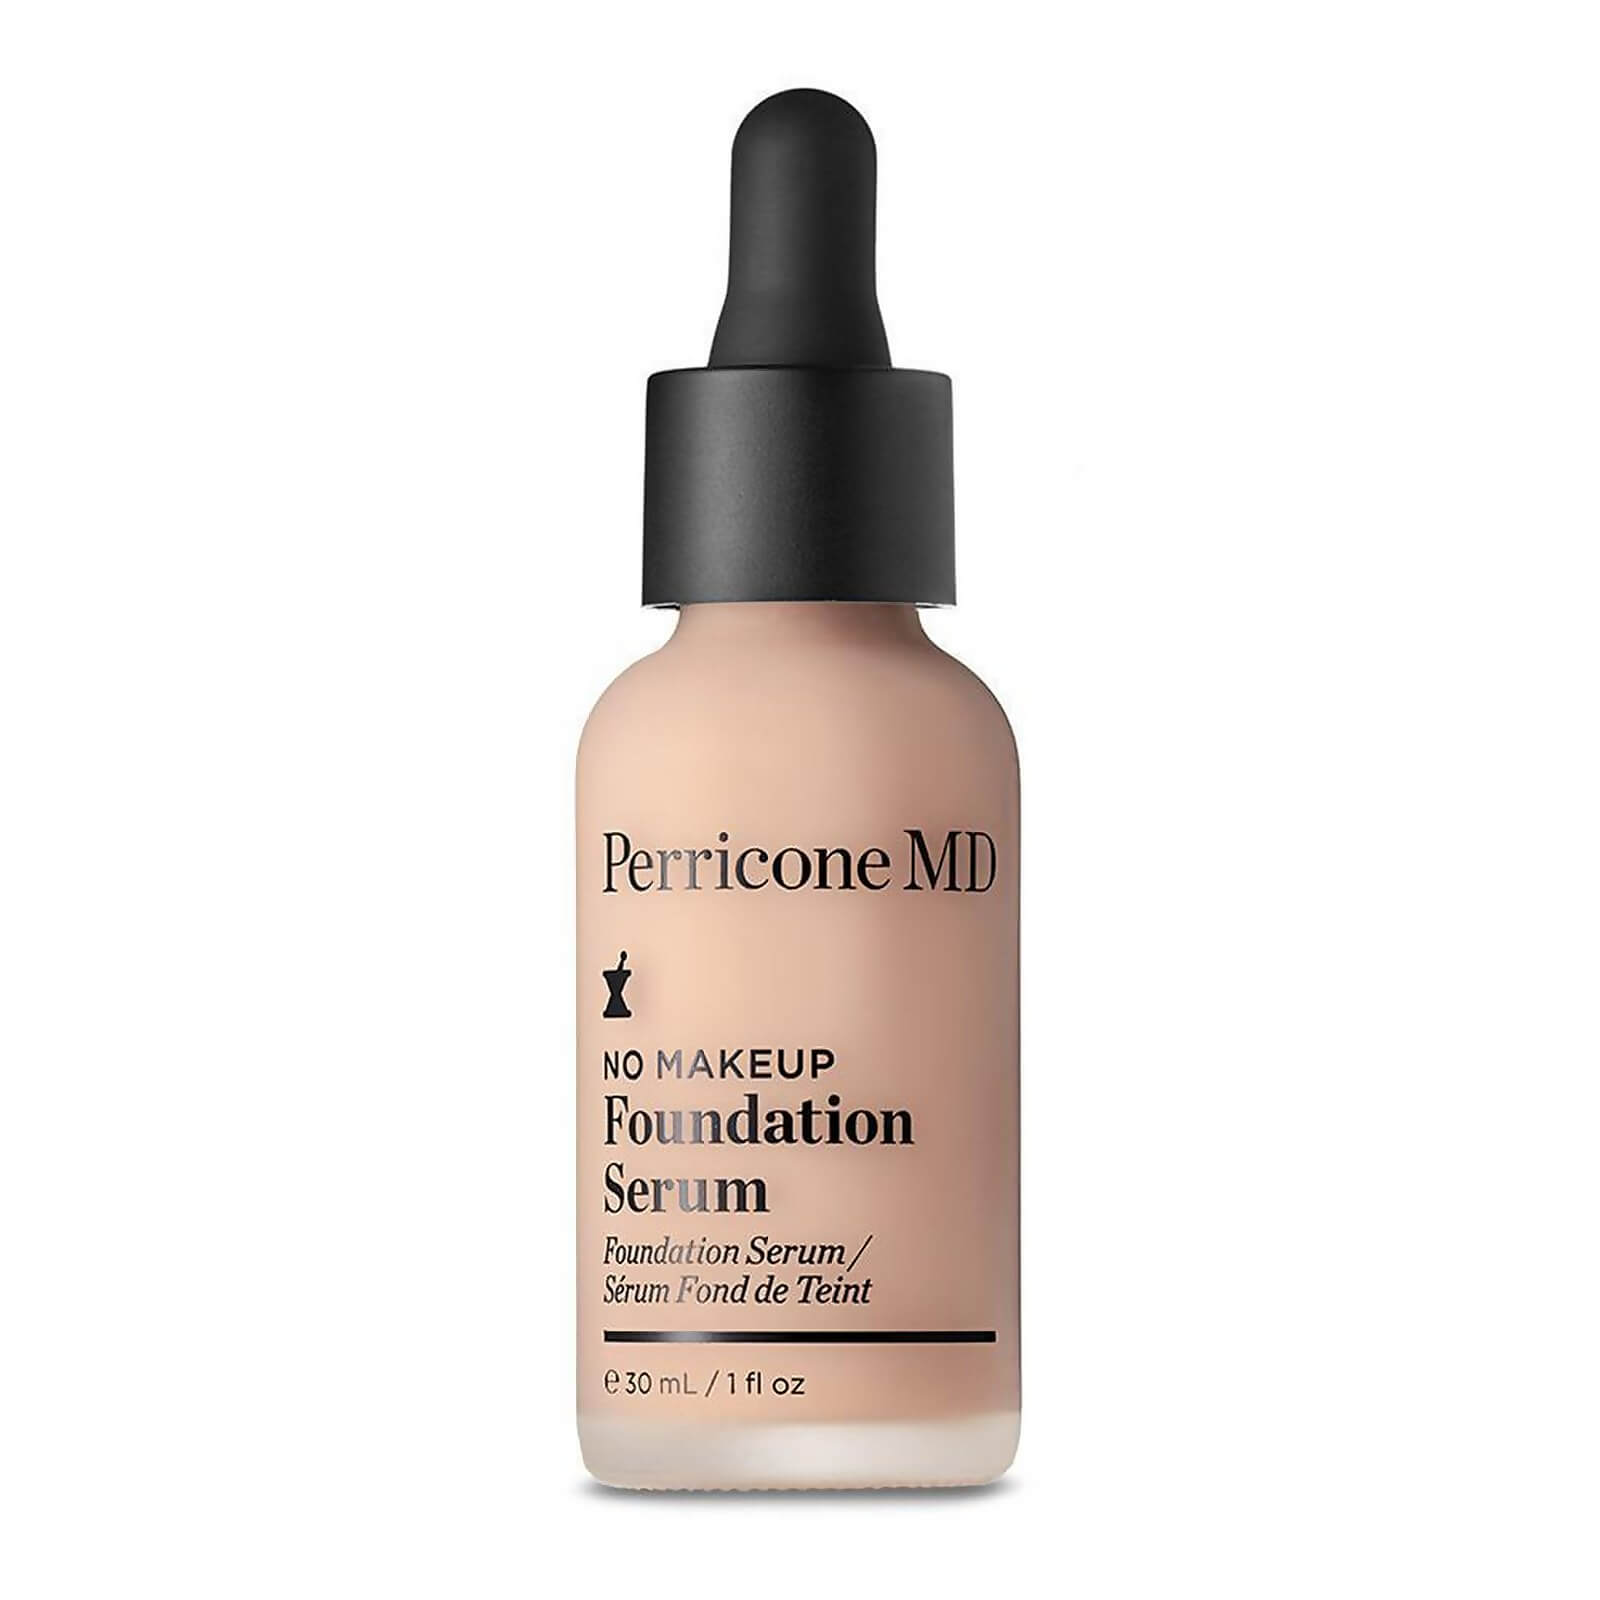 Perricone Md No Makeup Foundation Serum Broad Spectrum Spf20 30Ml (Various Shades) - 2 Ivory